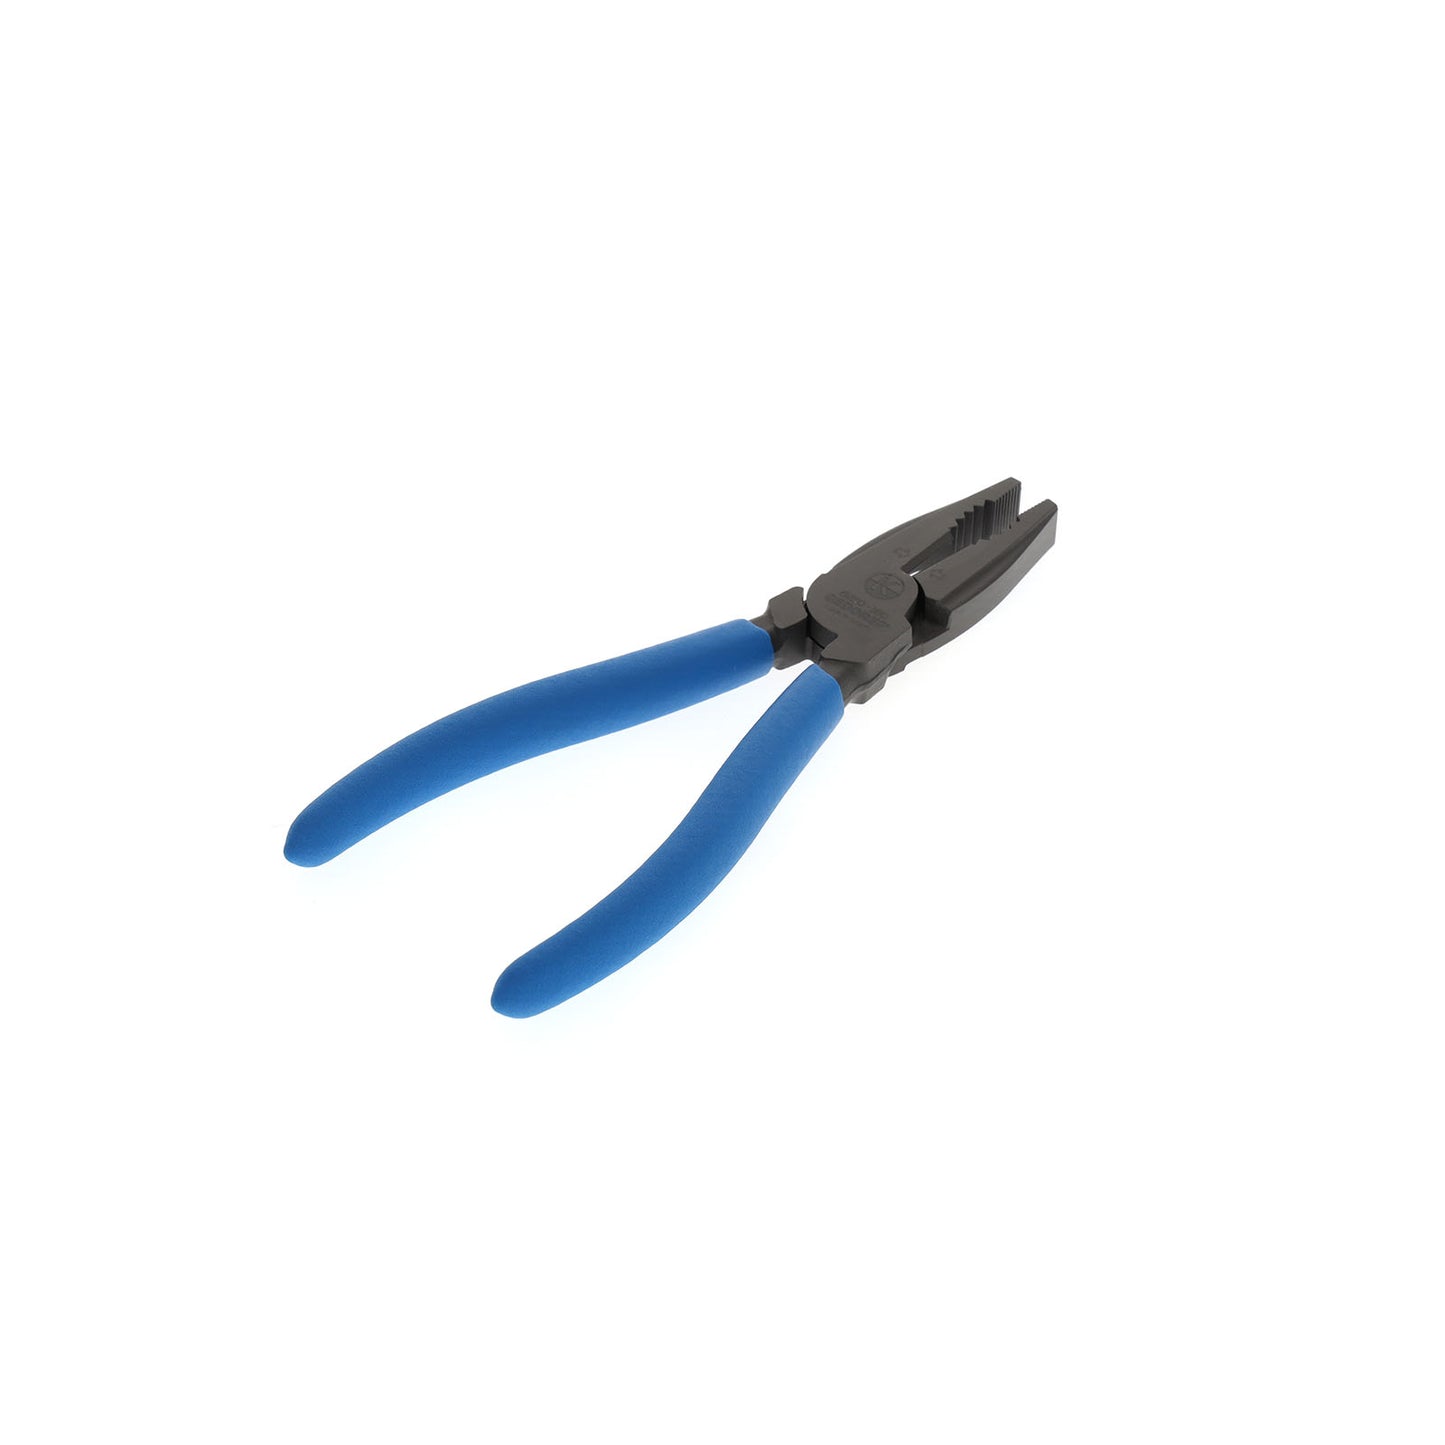 GEDORE 8250-160 TL - Universal force pliers 160 mm (1429574)